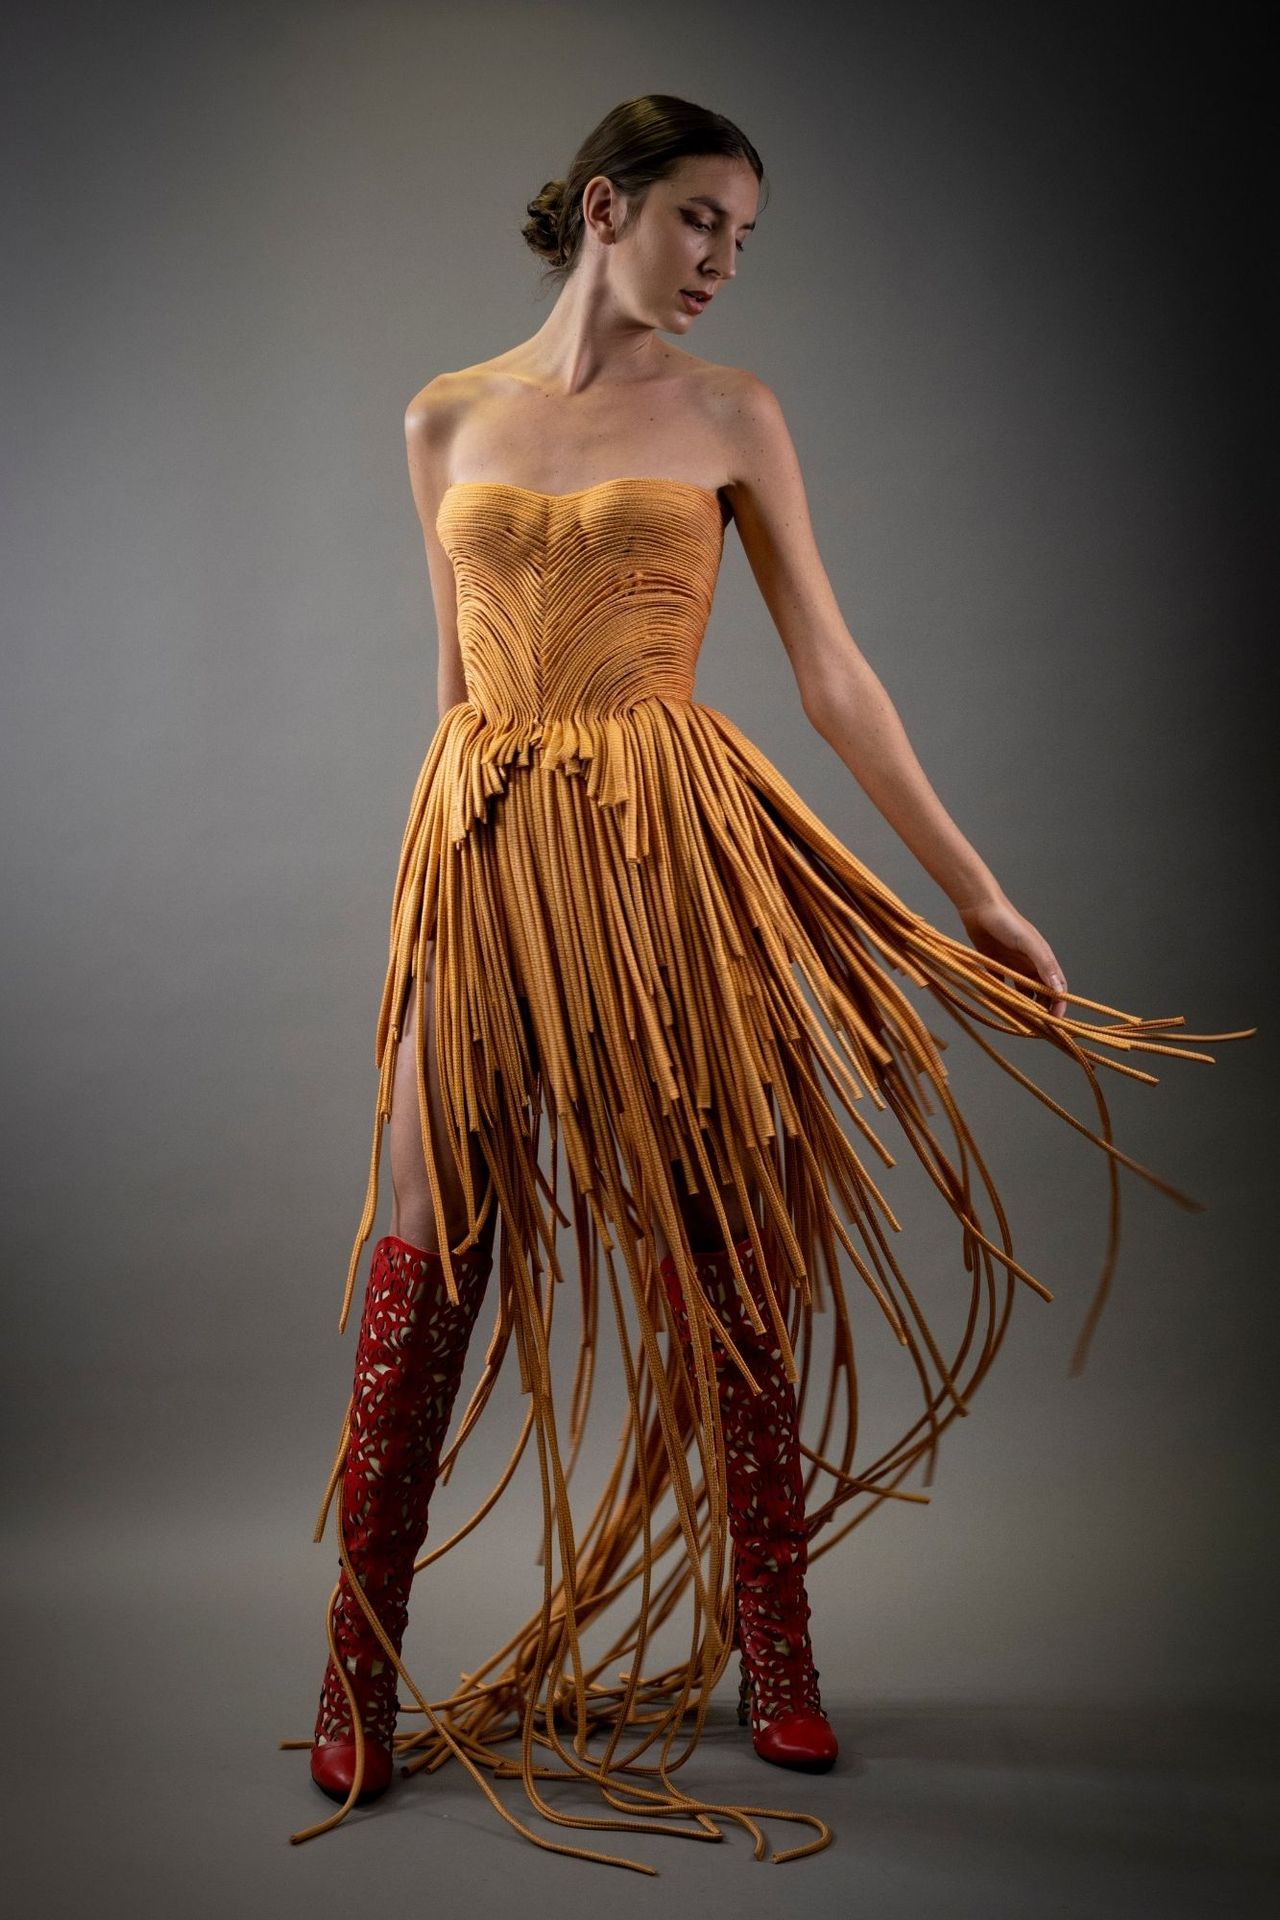 Robe "Spaghetti" Spaghetti" draped dress made from ties of former Aéroports De P&hellip;